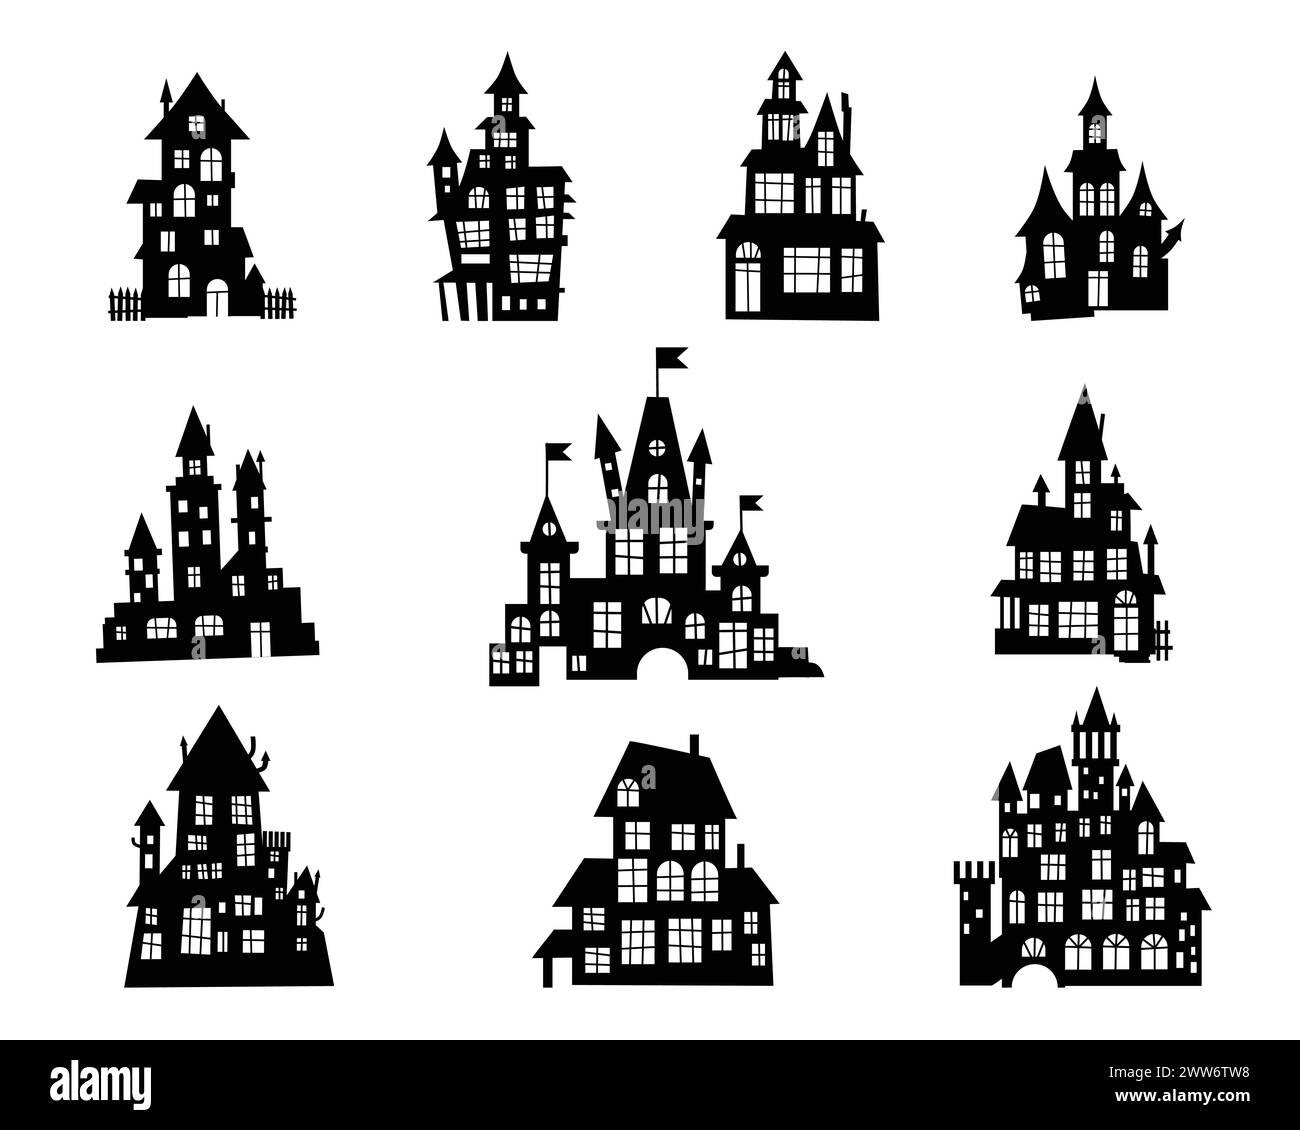 princess castle silhouettes set. Castles silhouettes set. Building of the medieval period Stock Vector